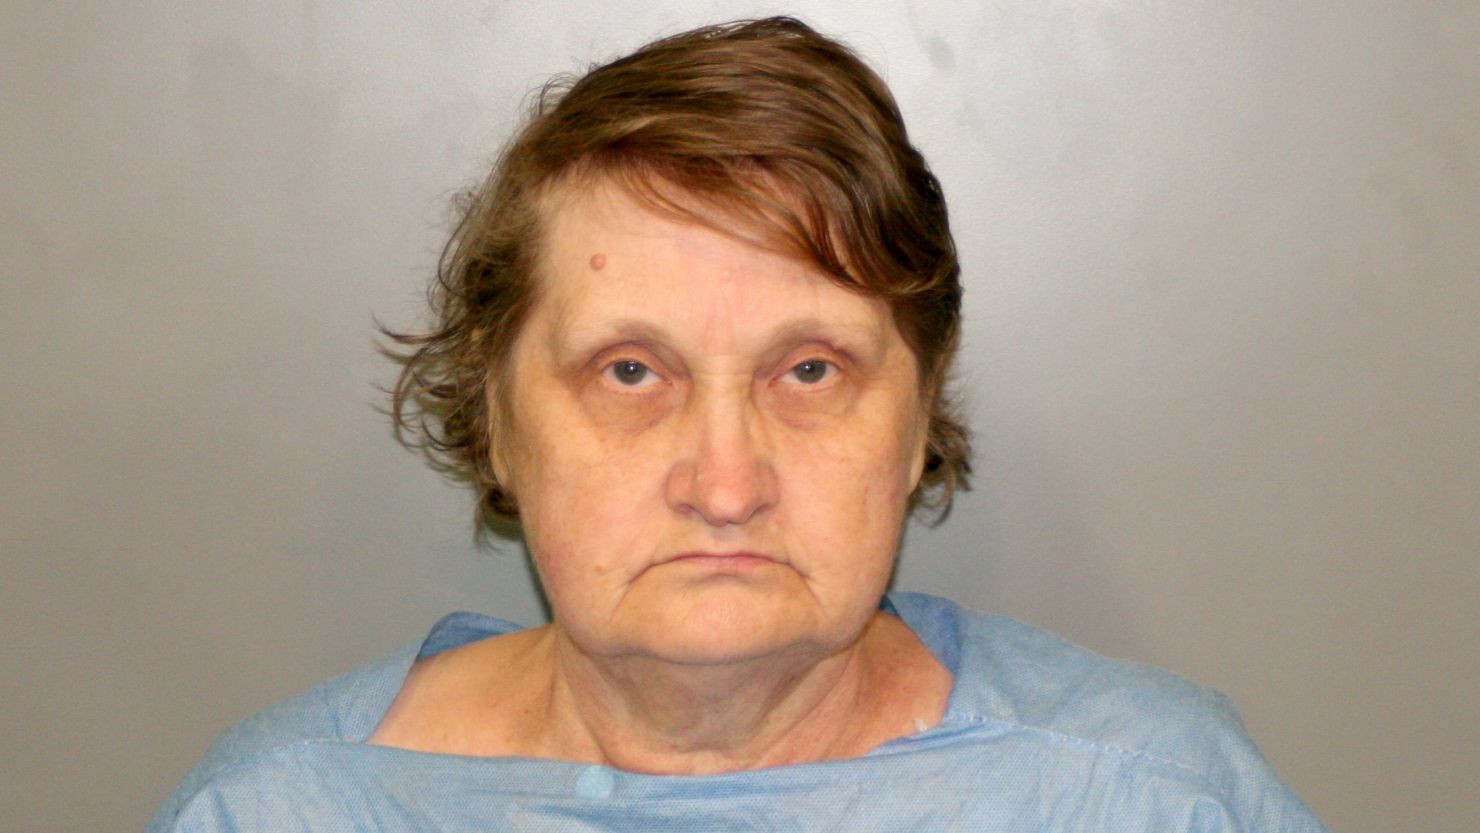 Alfreda Giedrojc has been charged with first-degree murder in the death of her 6-month-old granddaughter.